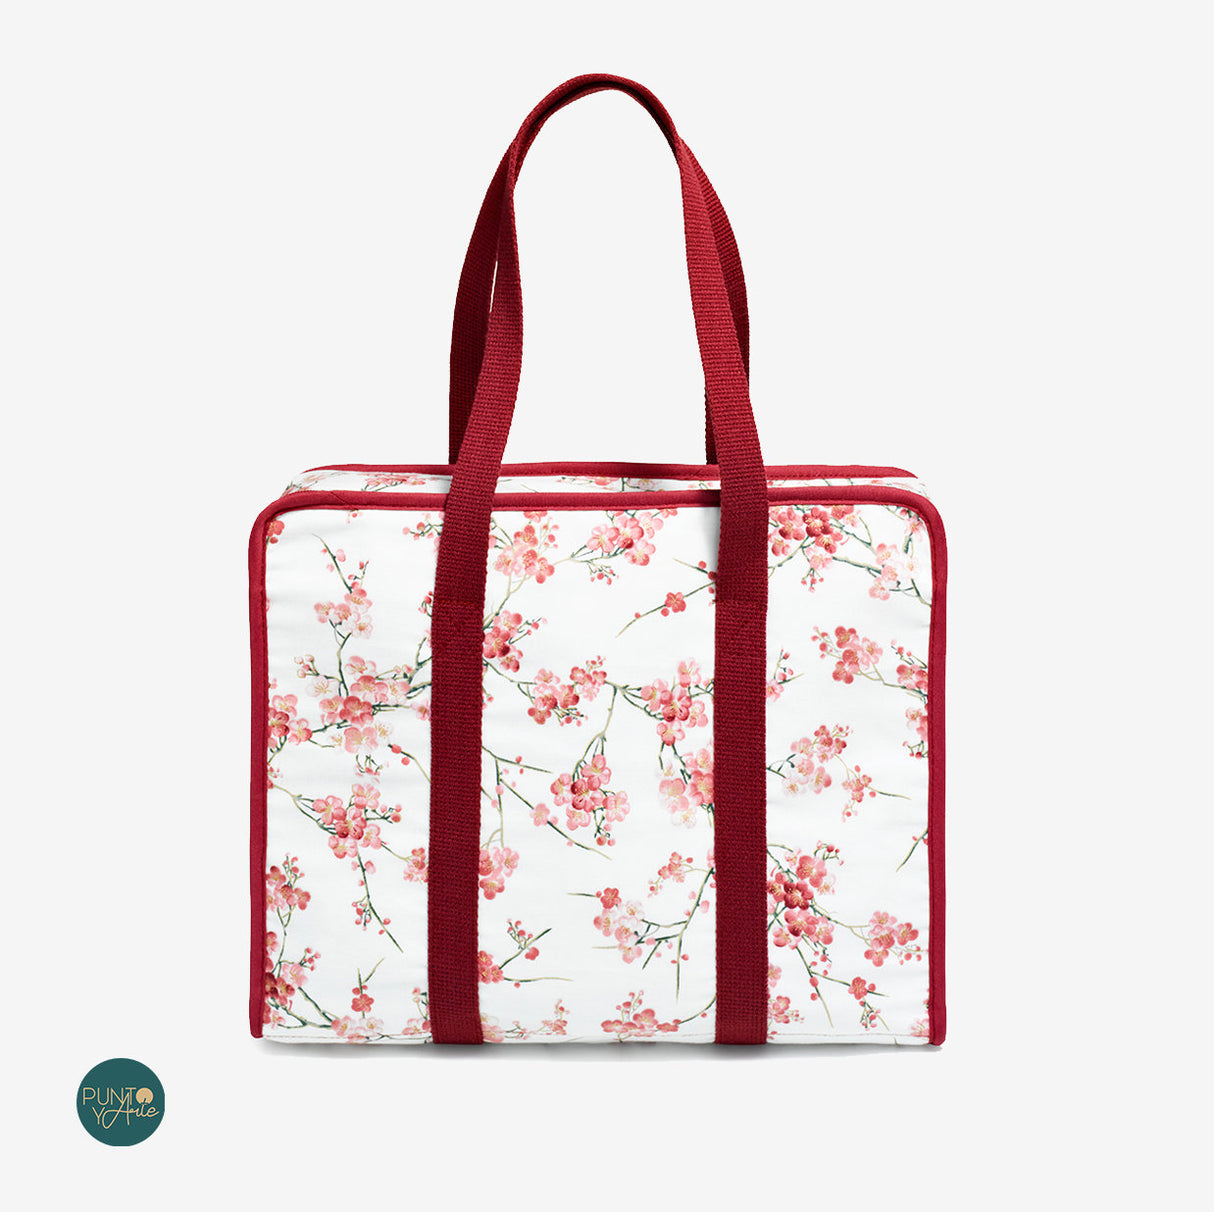 All-in-One Bag Prym Nostalgia Collection - Elegance and Organization for your Sewing Tools